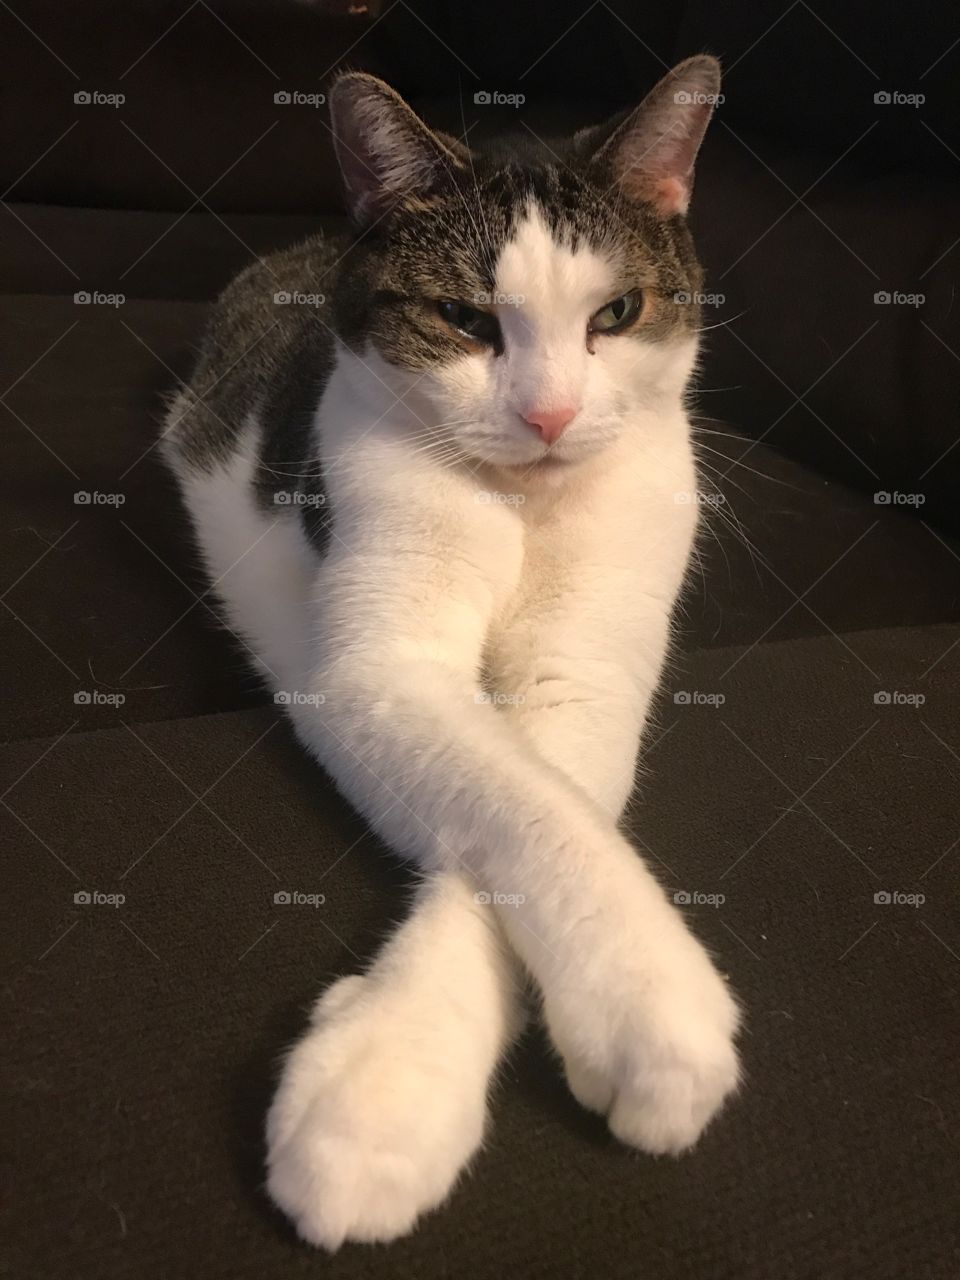 My cat, Casey. He love crossing his paws. 